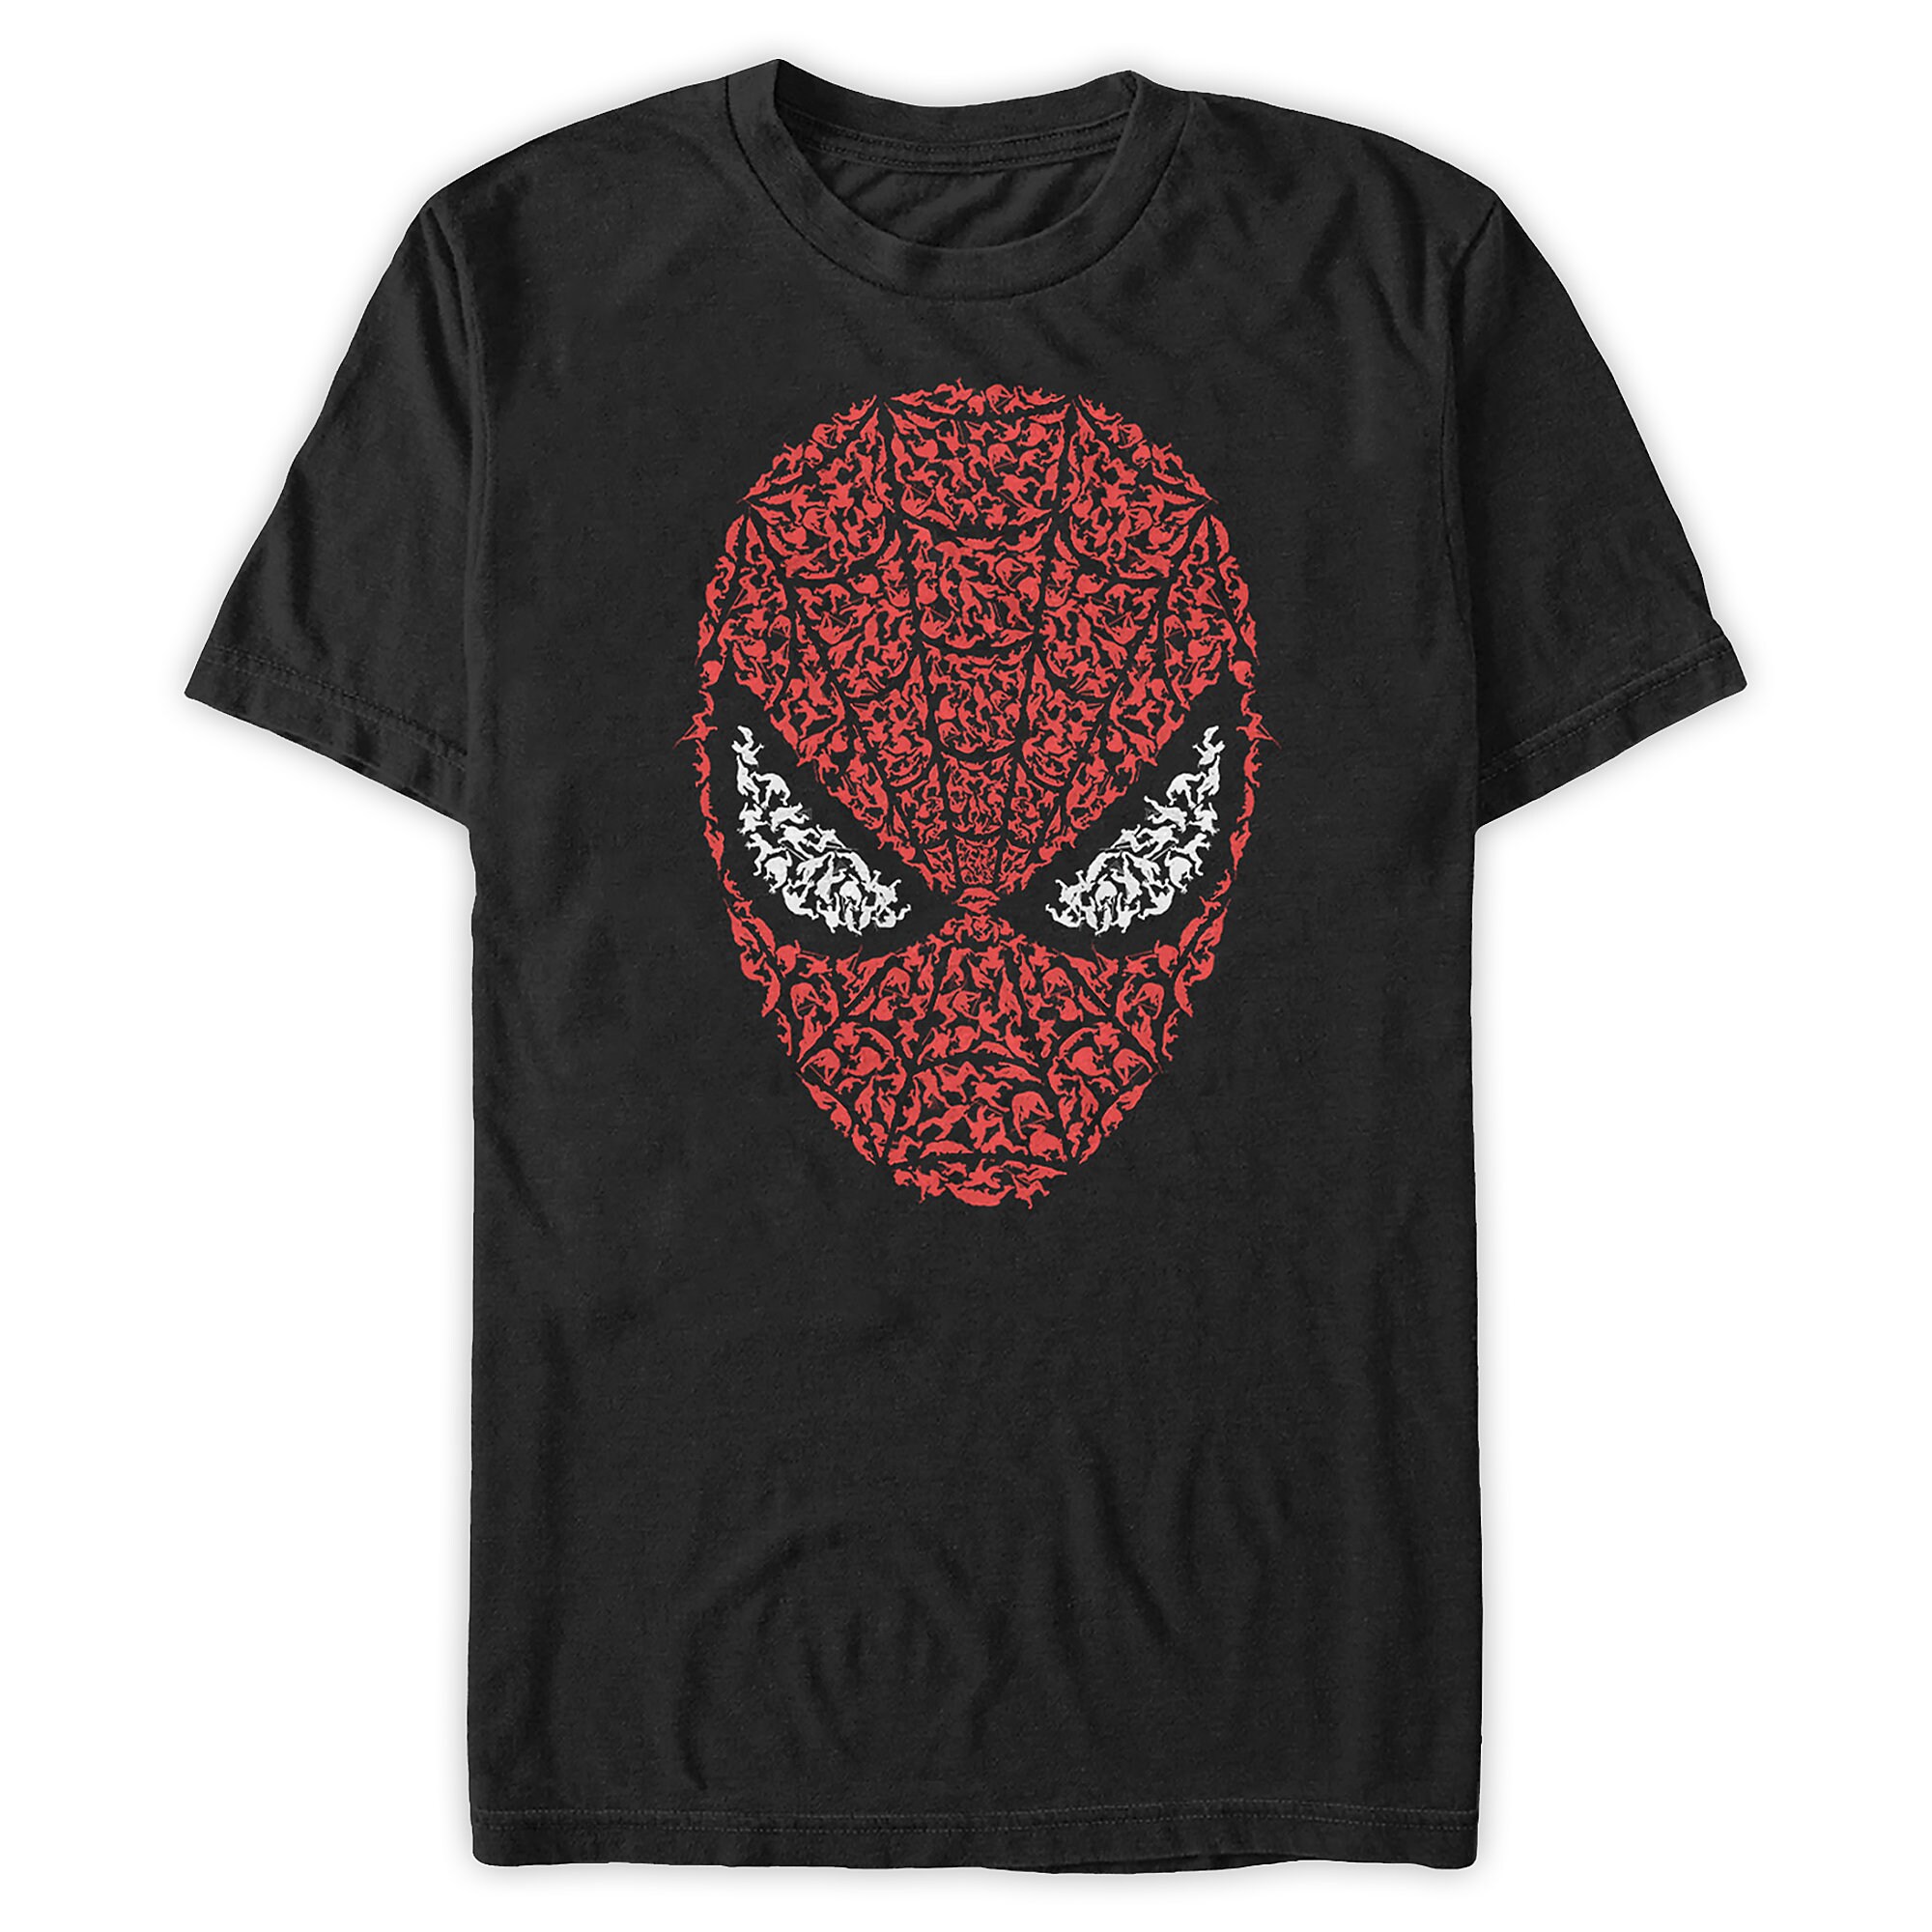 Spider-Man: Far From Home Mask T-Shirt for Men